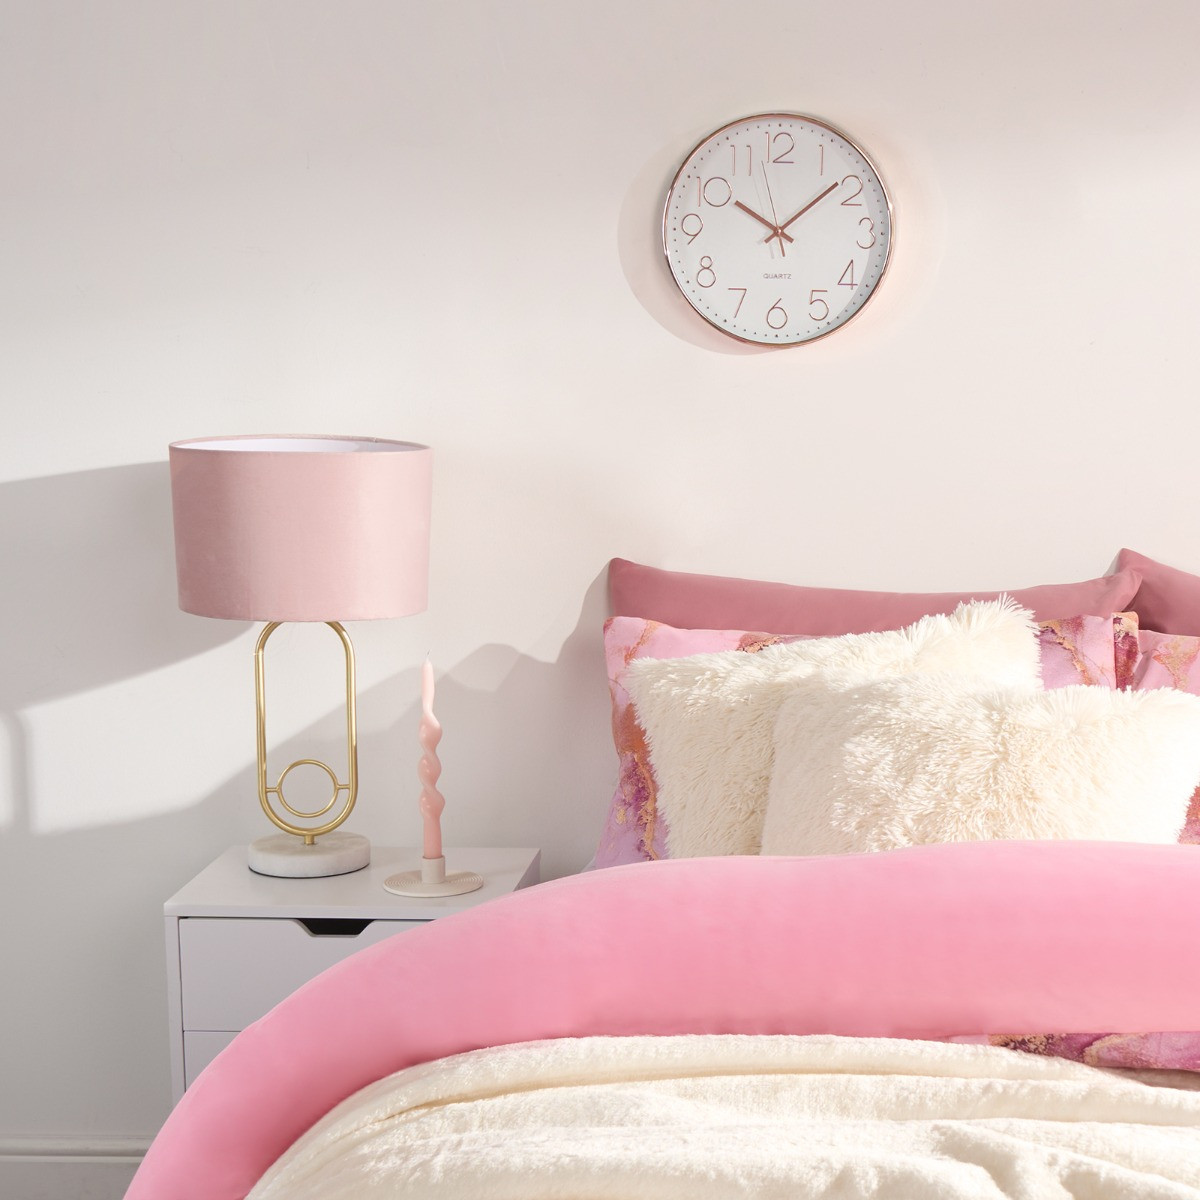 OHS Wall Clock - Rose Gold>